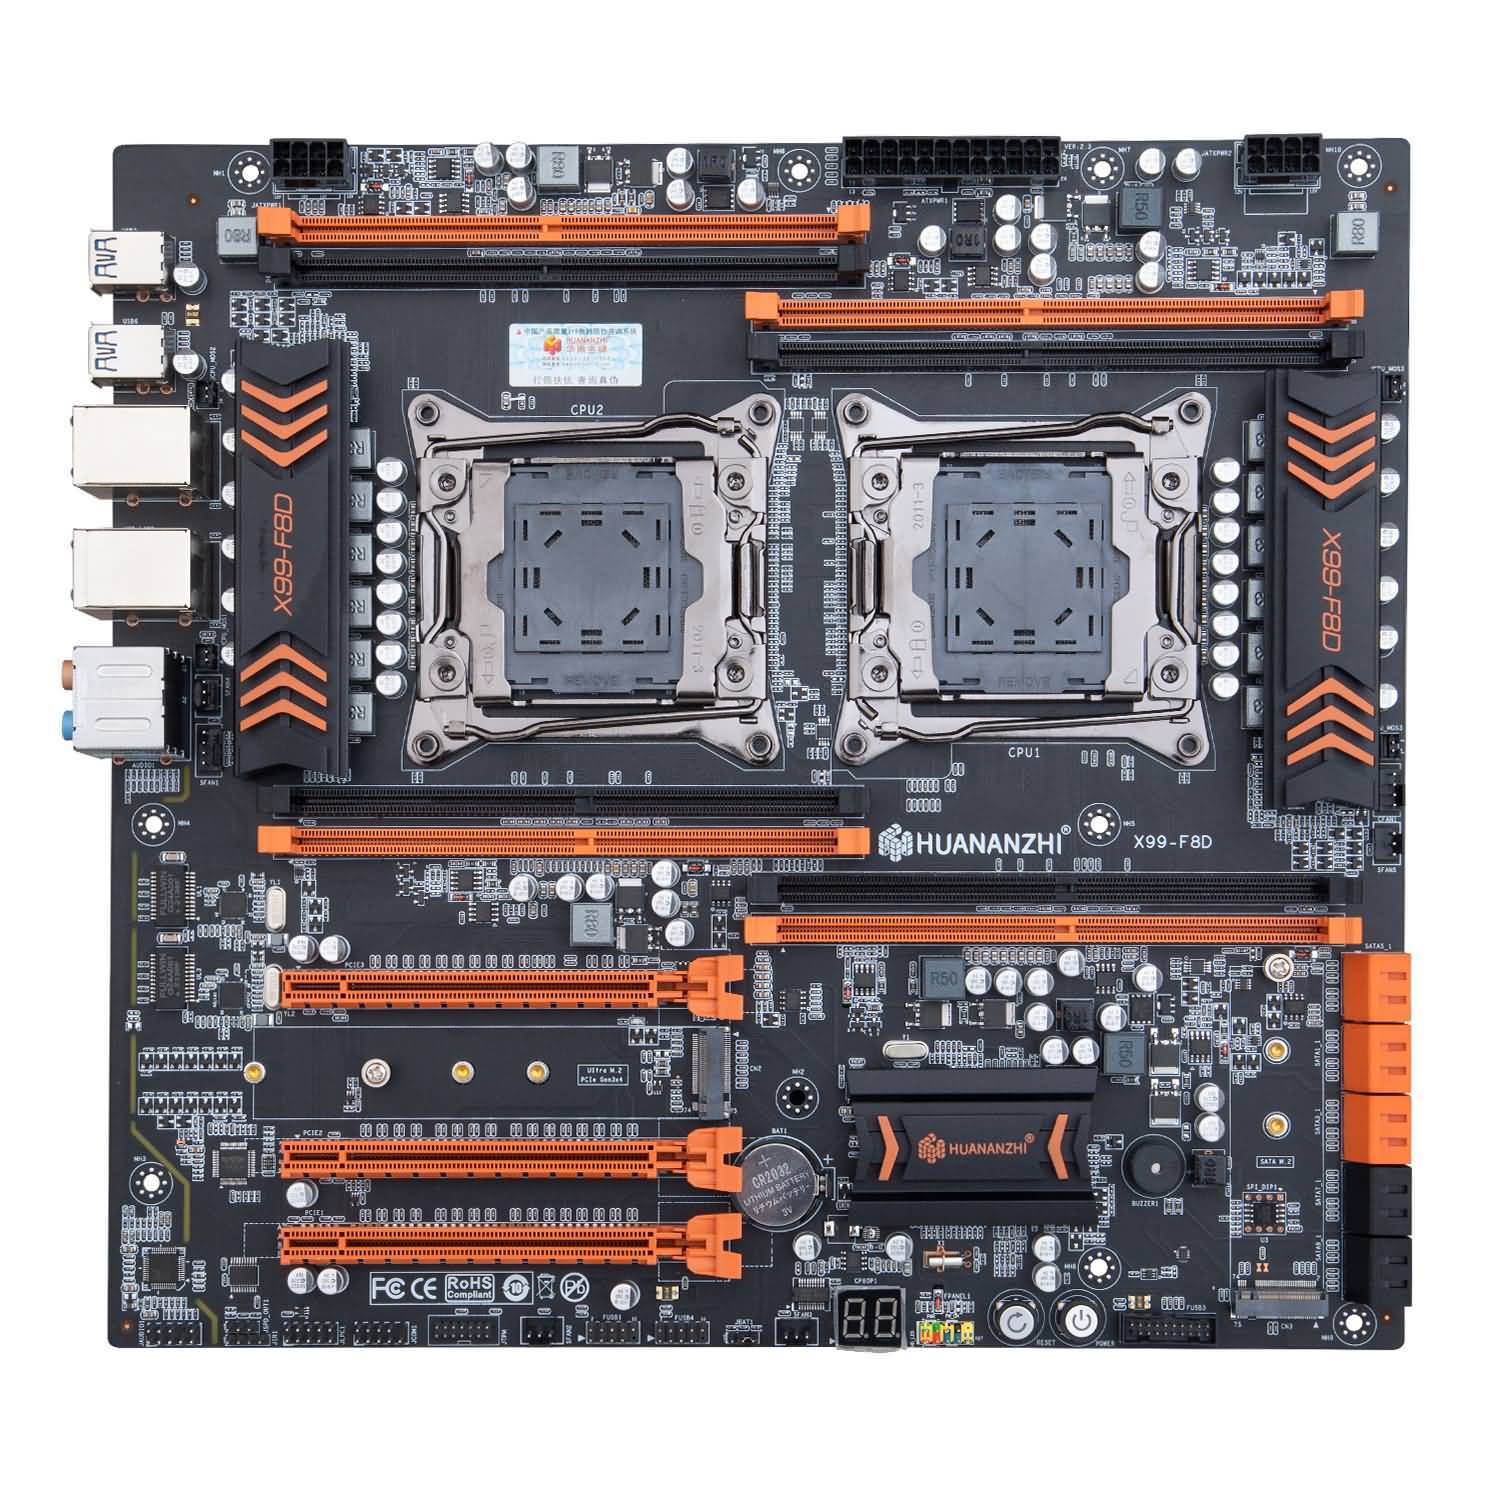 Download Huananzhi X99Dual-F8D Motherboard(Without dialer) Free